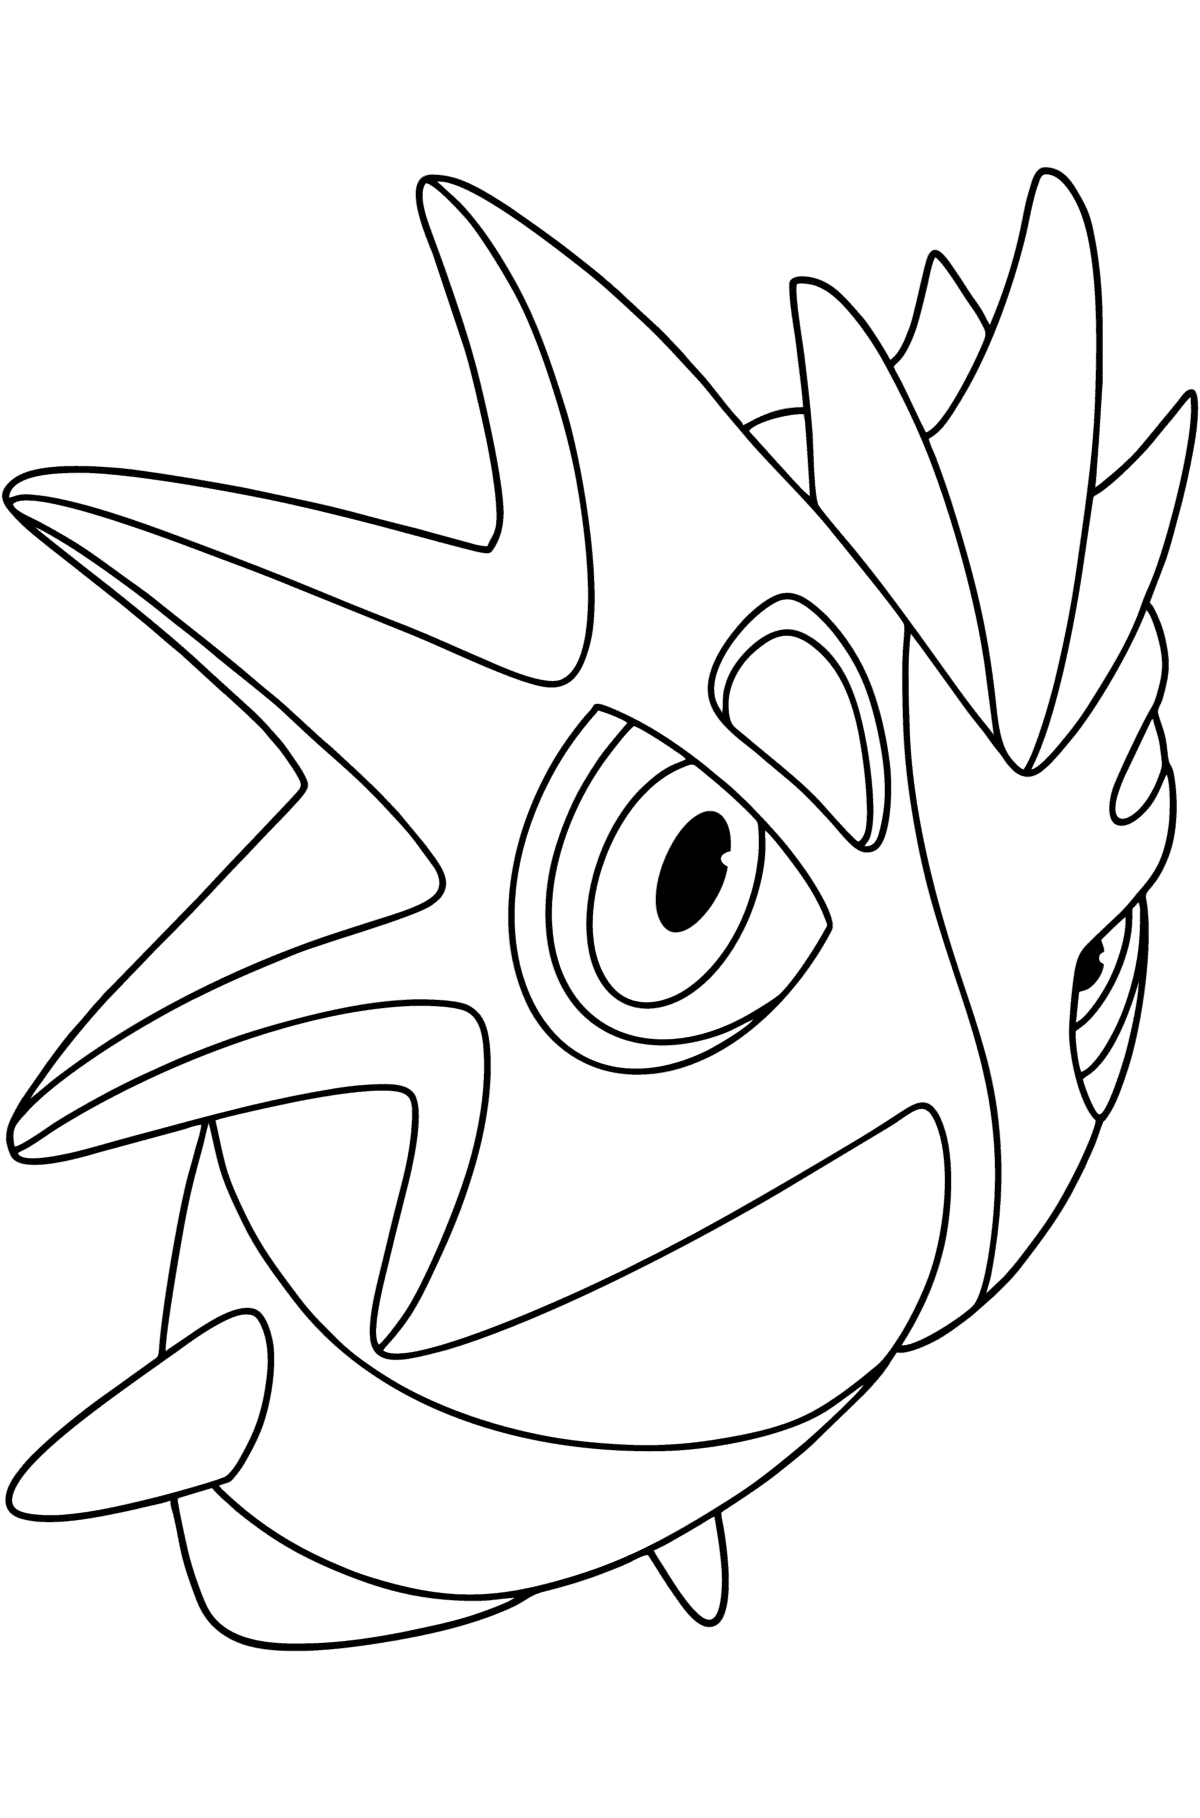 Colouring page Pokémon X and Y Pupitar - Coloring Pages for Kids